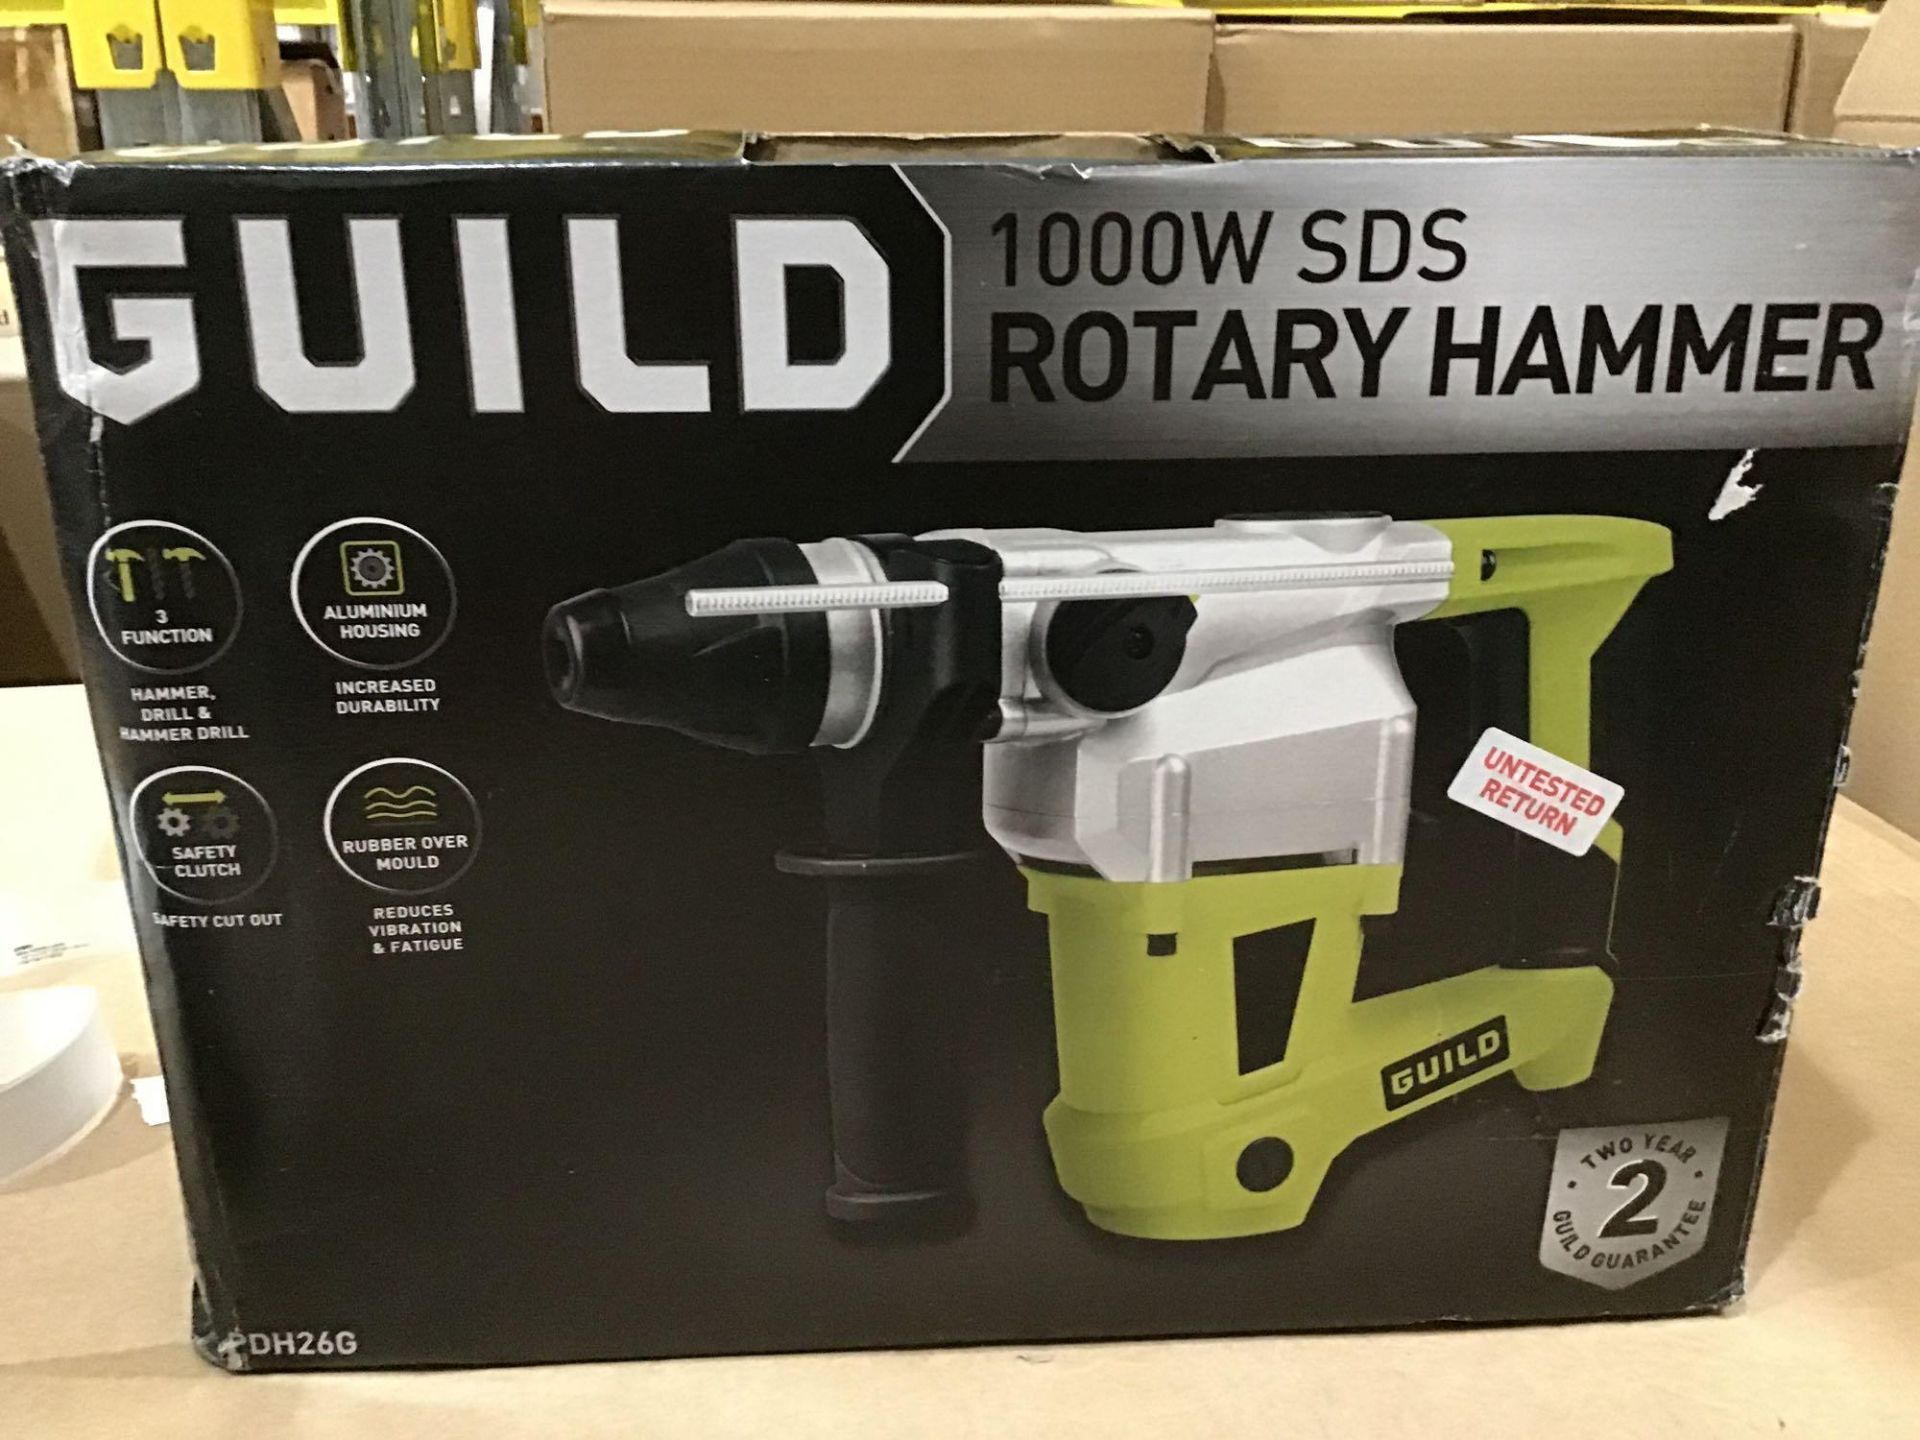 Guild 1000W SDS Rotary Hammer £50.00 RRP - Image 4 of 5